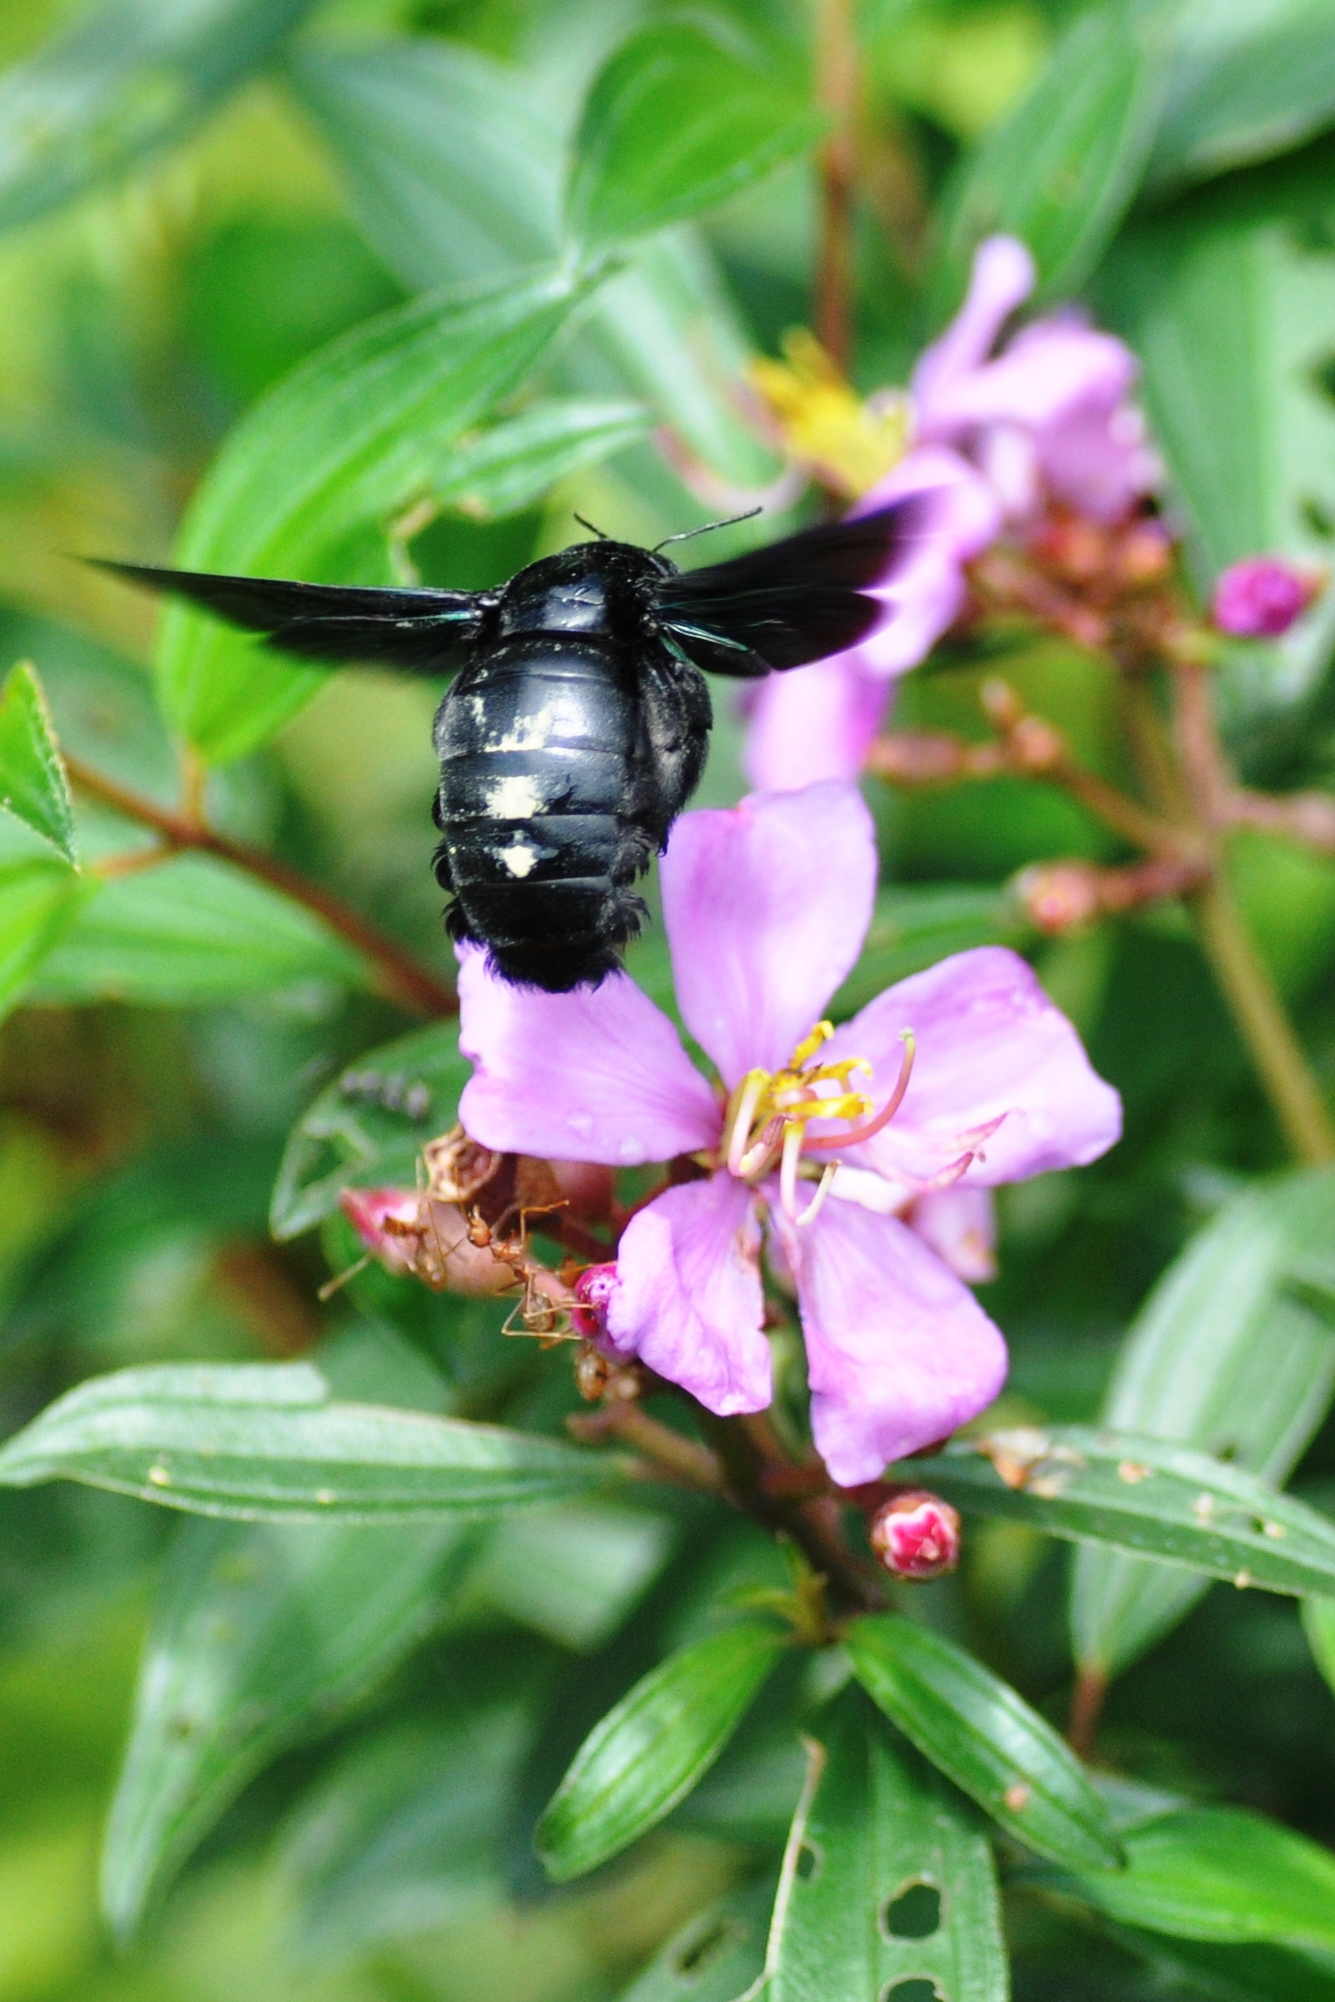 File:Singapore rhododendron with carpenter bee 2.jpg - Wikimedia Commons